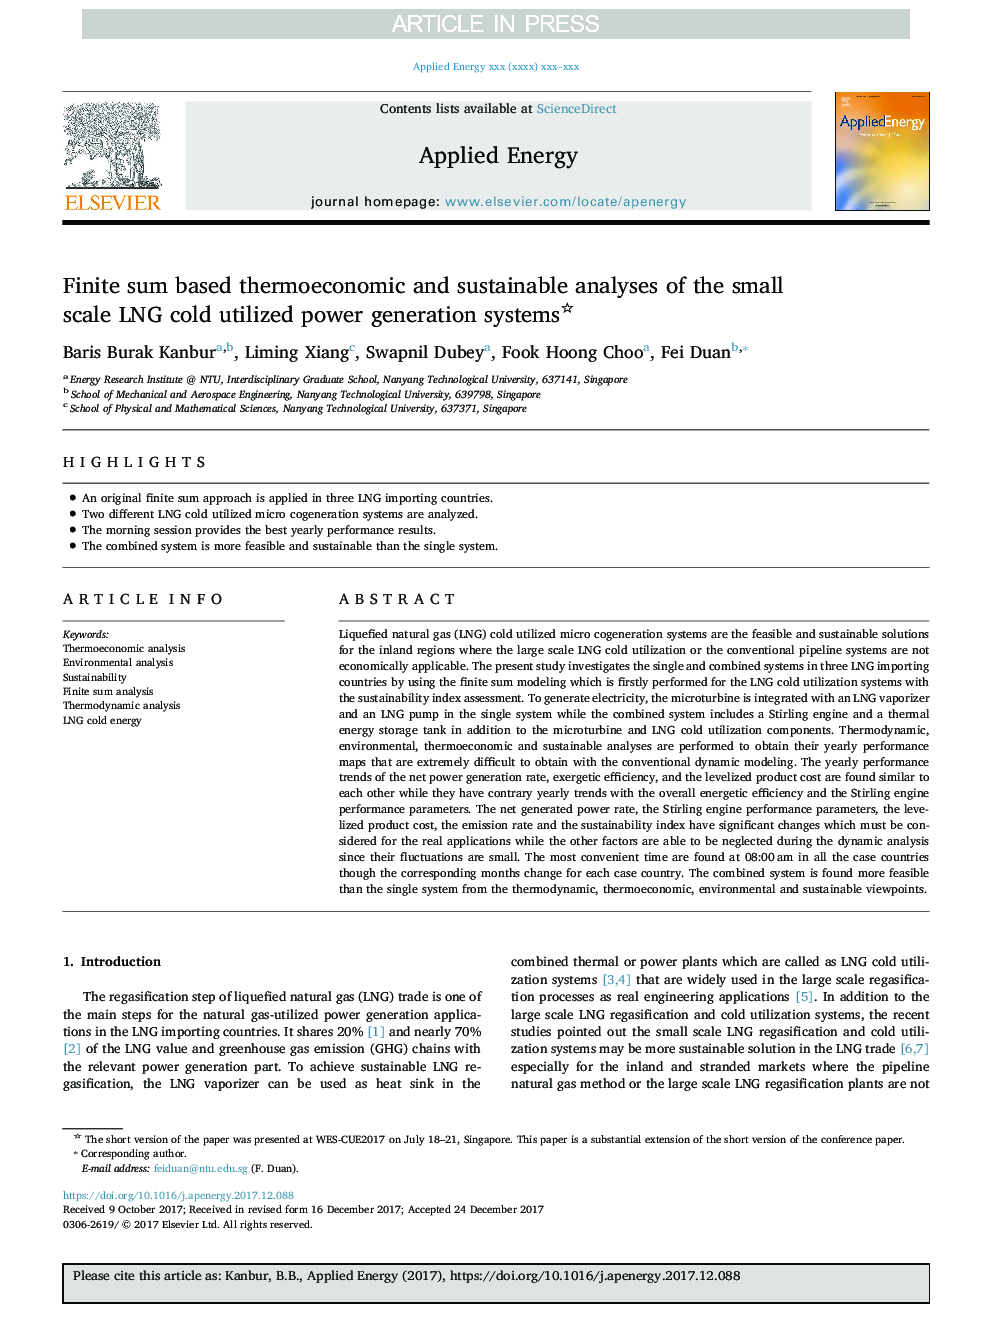 Finite sum based thermoeconomic and sustainable analyses of the small scale LNG cold utilized power generation systems